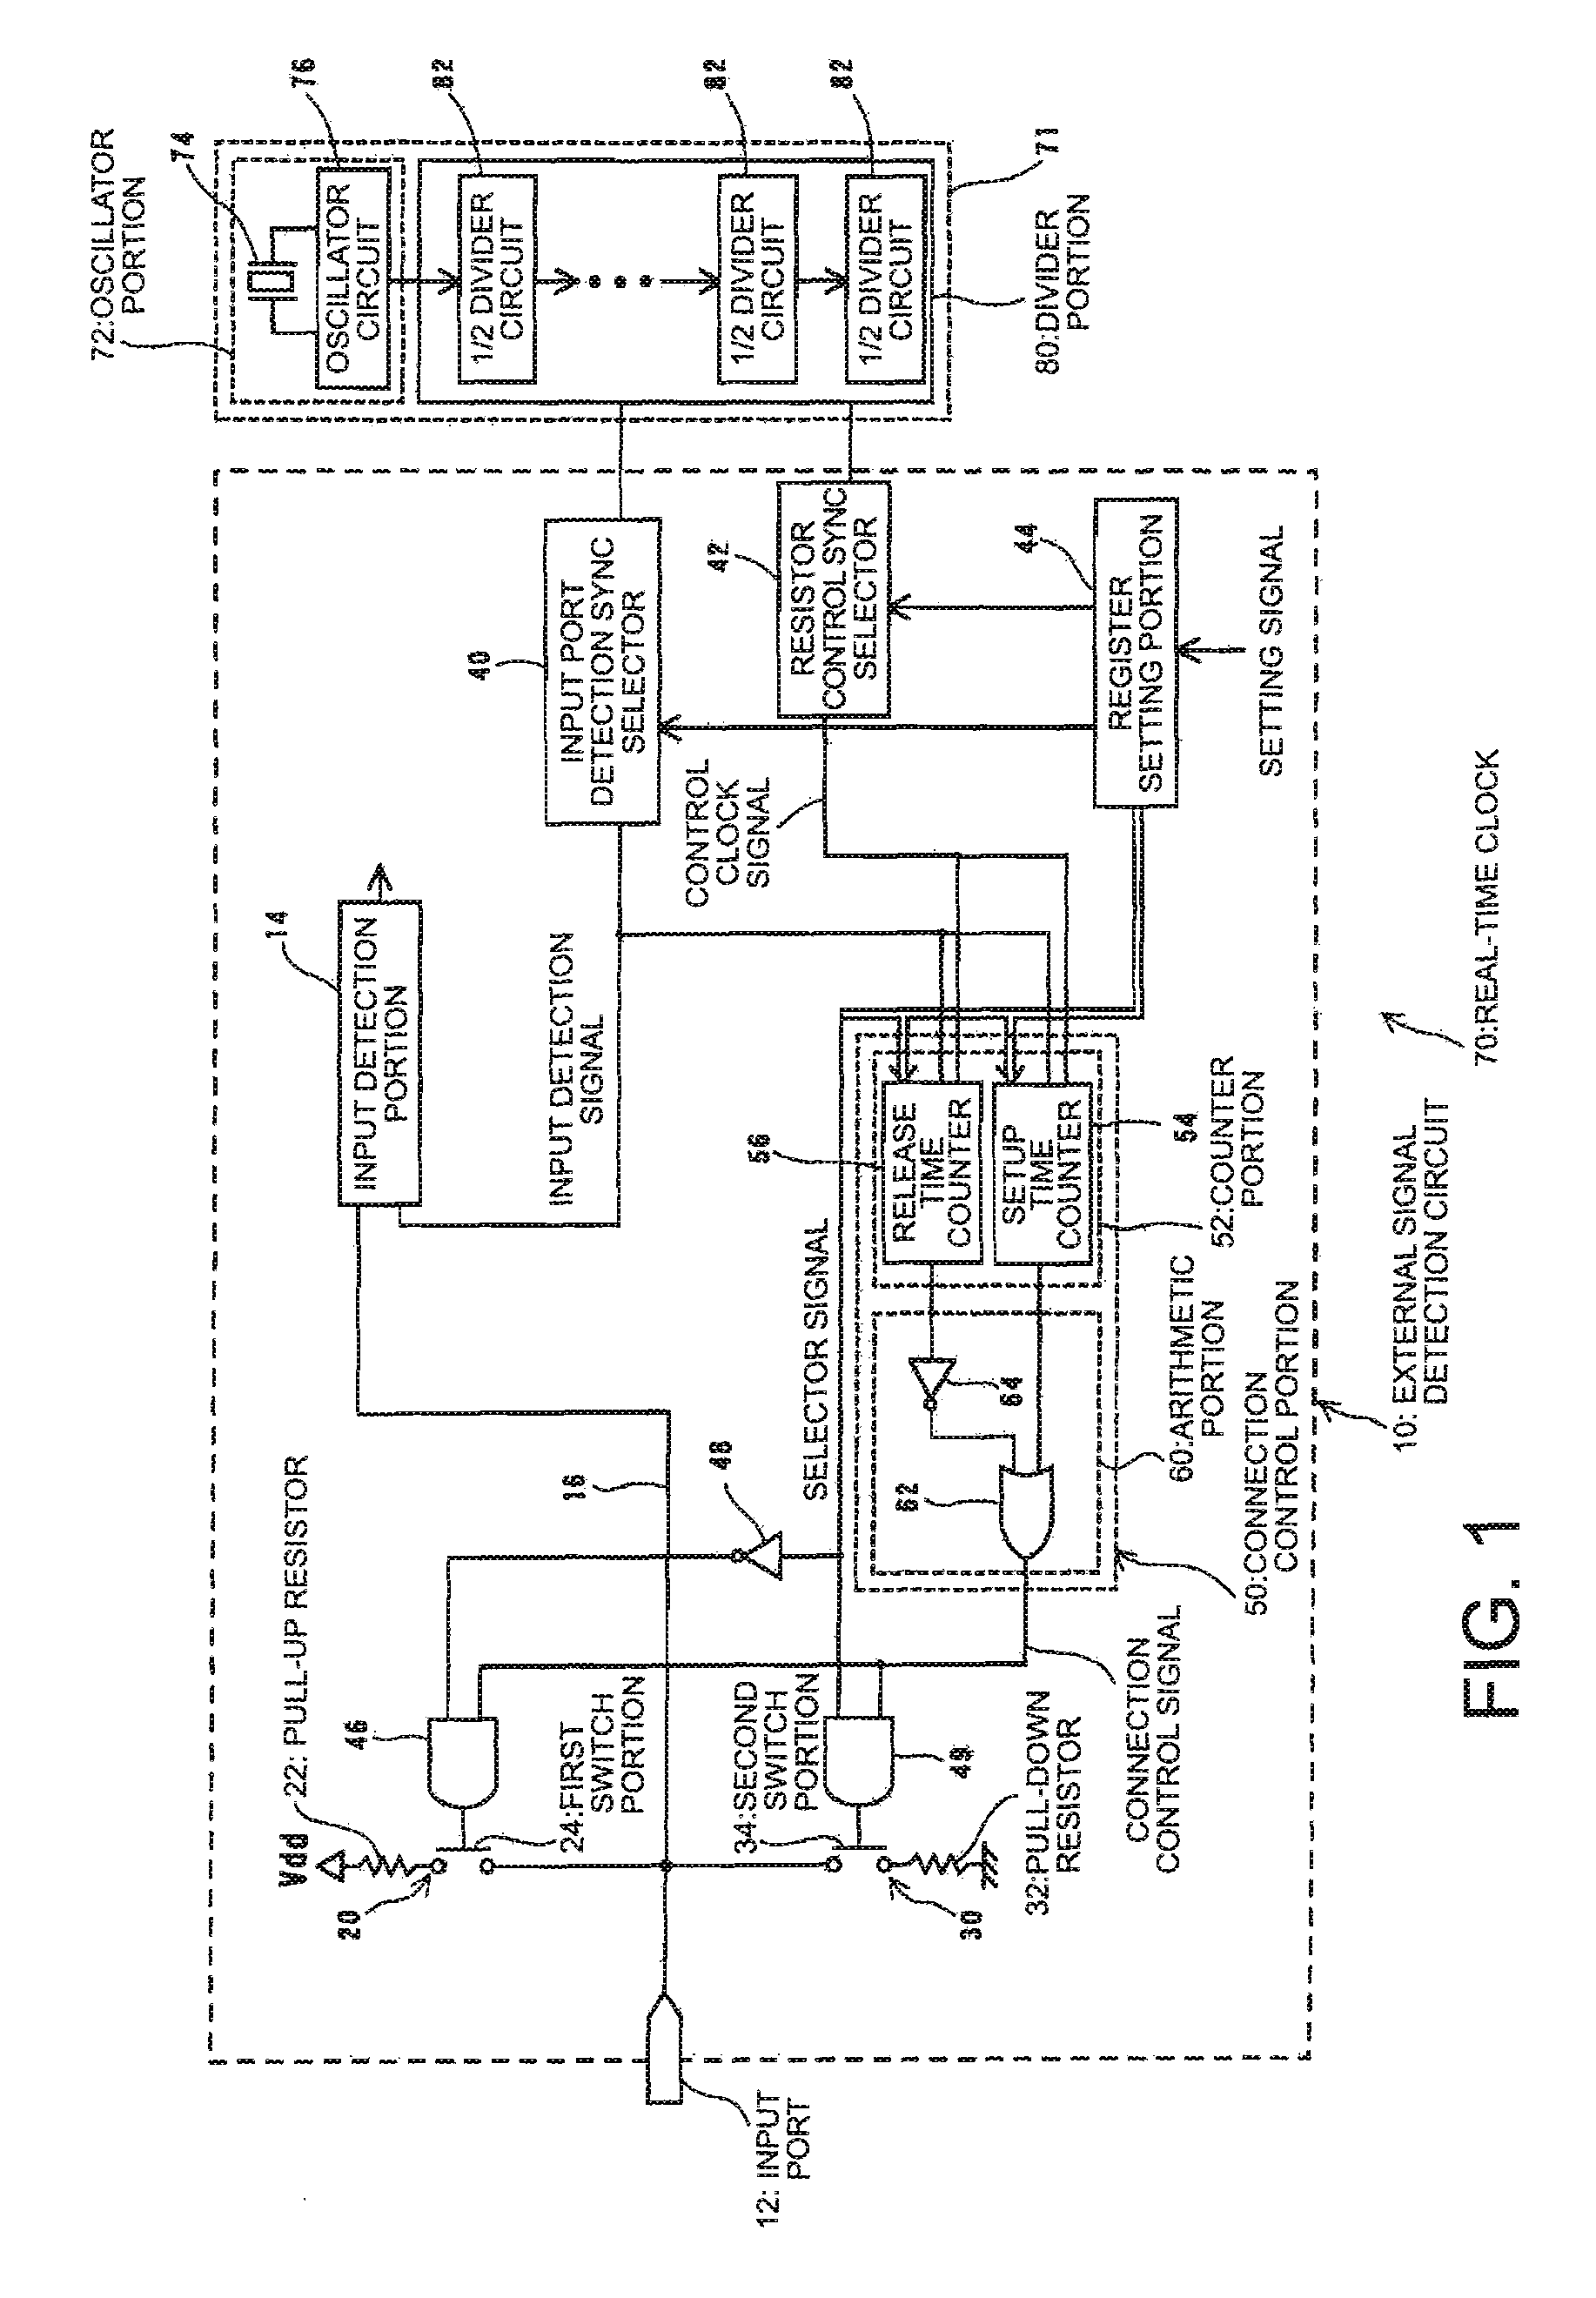 External signal detection circuit and real-time clock